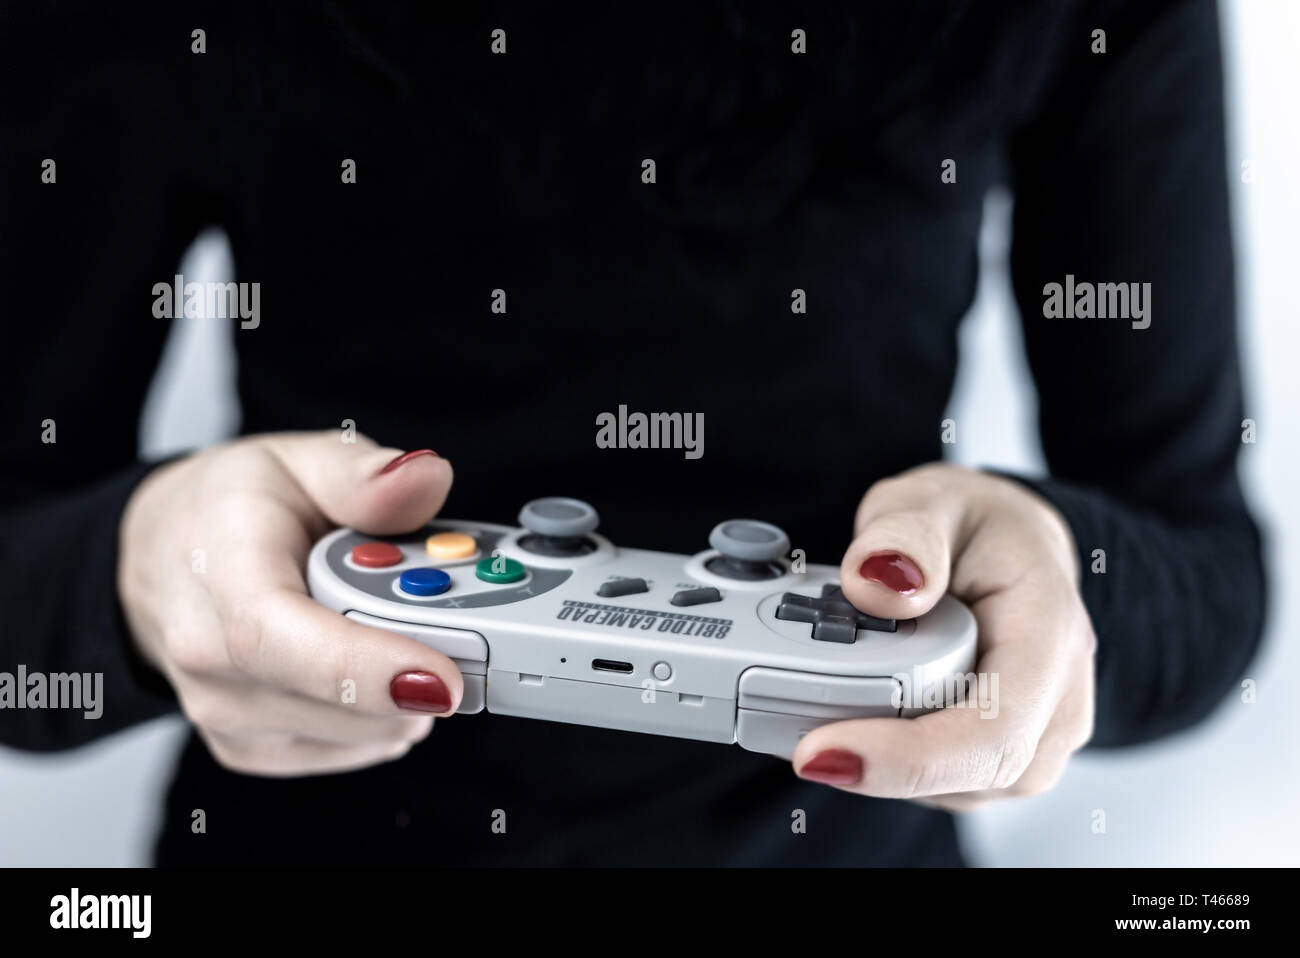 HEGGENES, NORWAY - FEBRUARY 6, 2019: Closeup of woman holding a gaming controller with Super Nintendo retro design playing video games Stock Photo